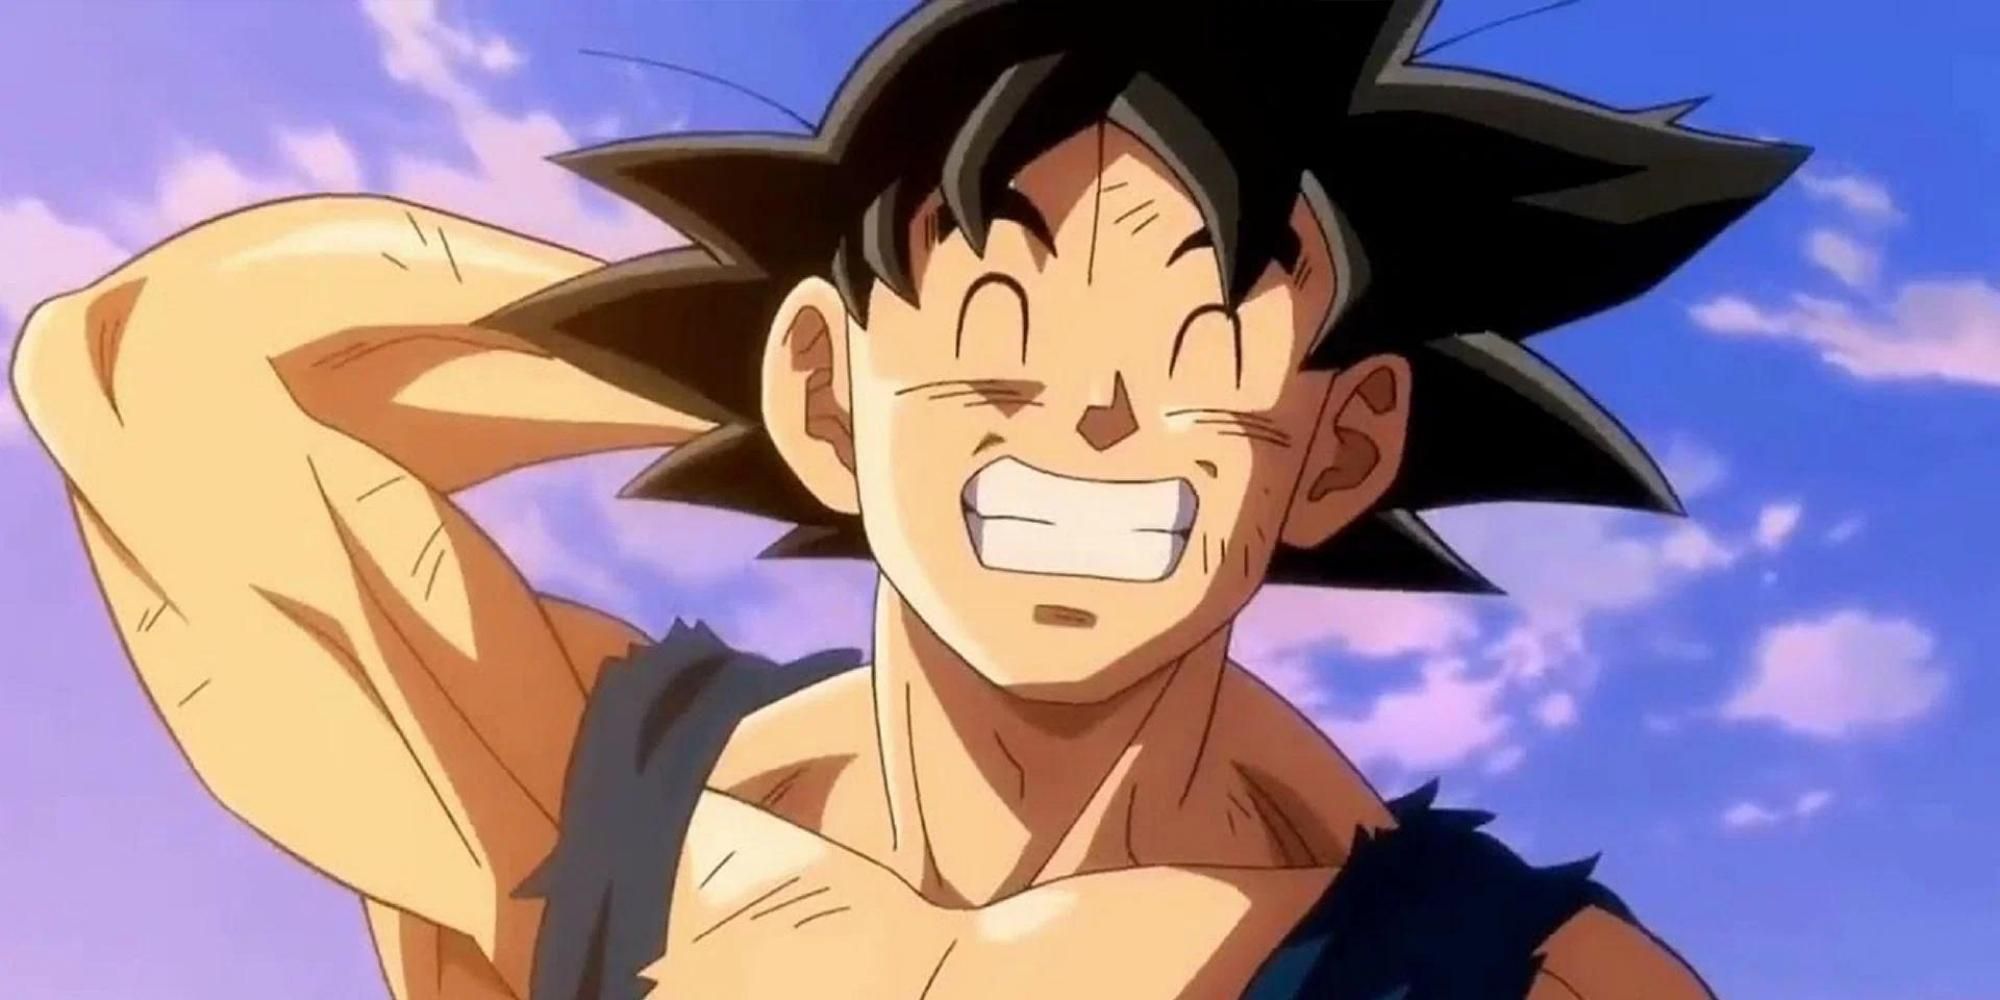 Goku covered in scratches and smiling after a battle